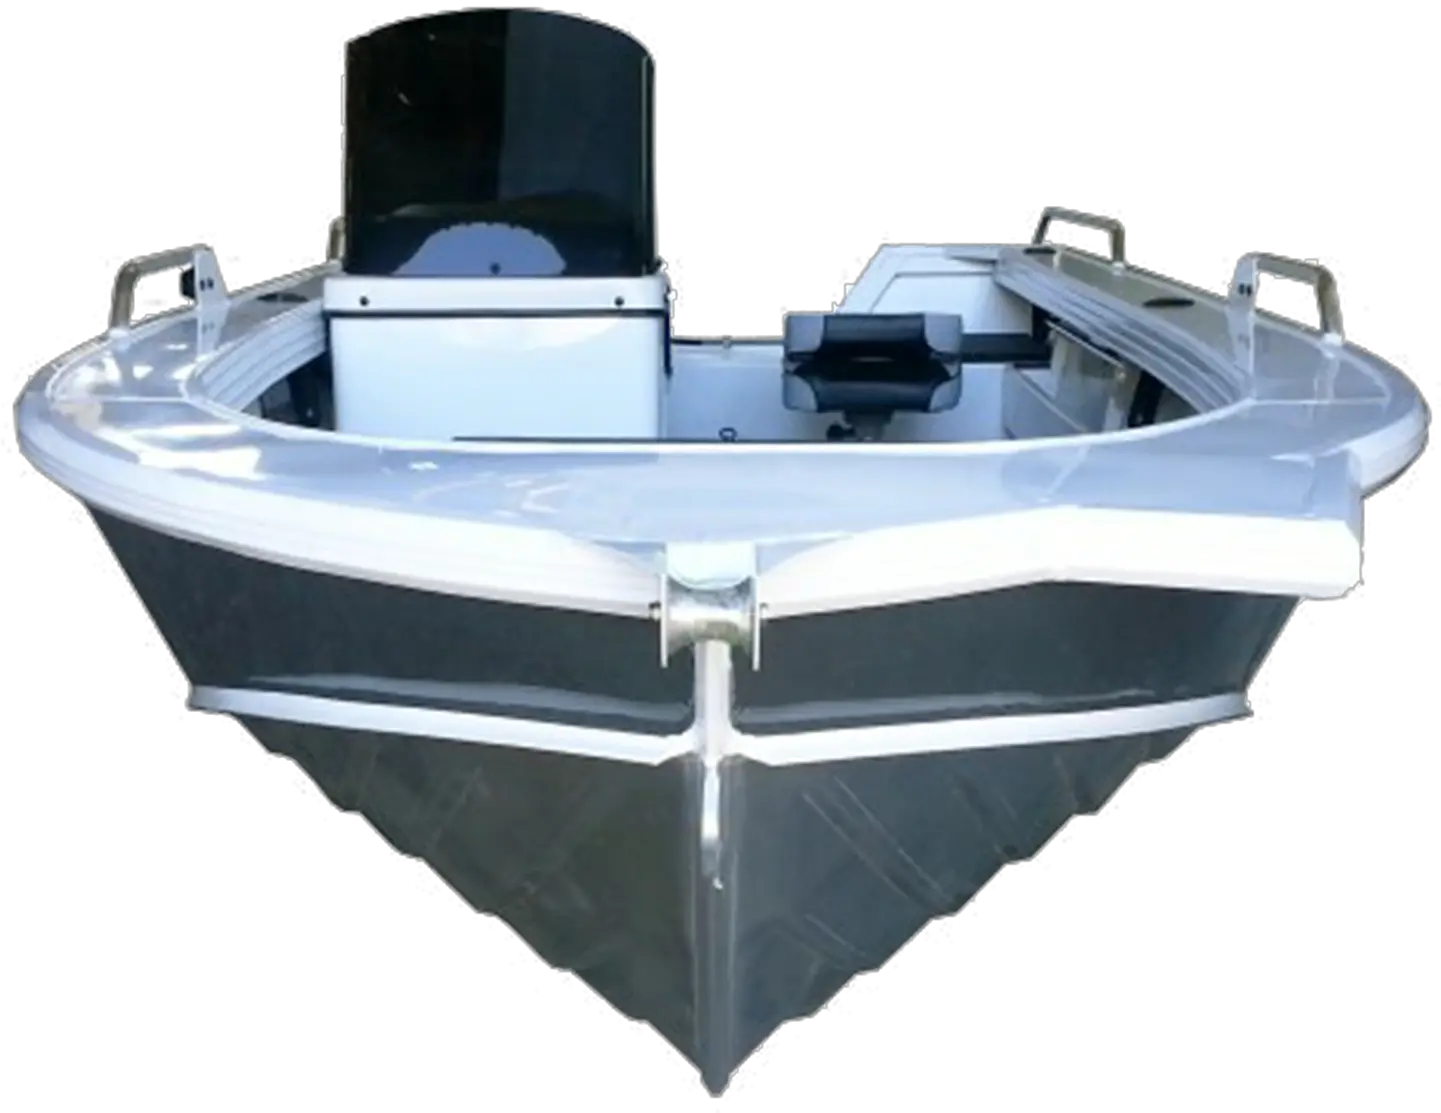 Boat Front View Transparent Png Image Boat Front View Png Boat Transparent